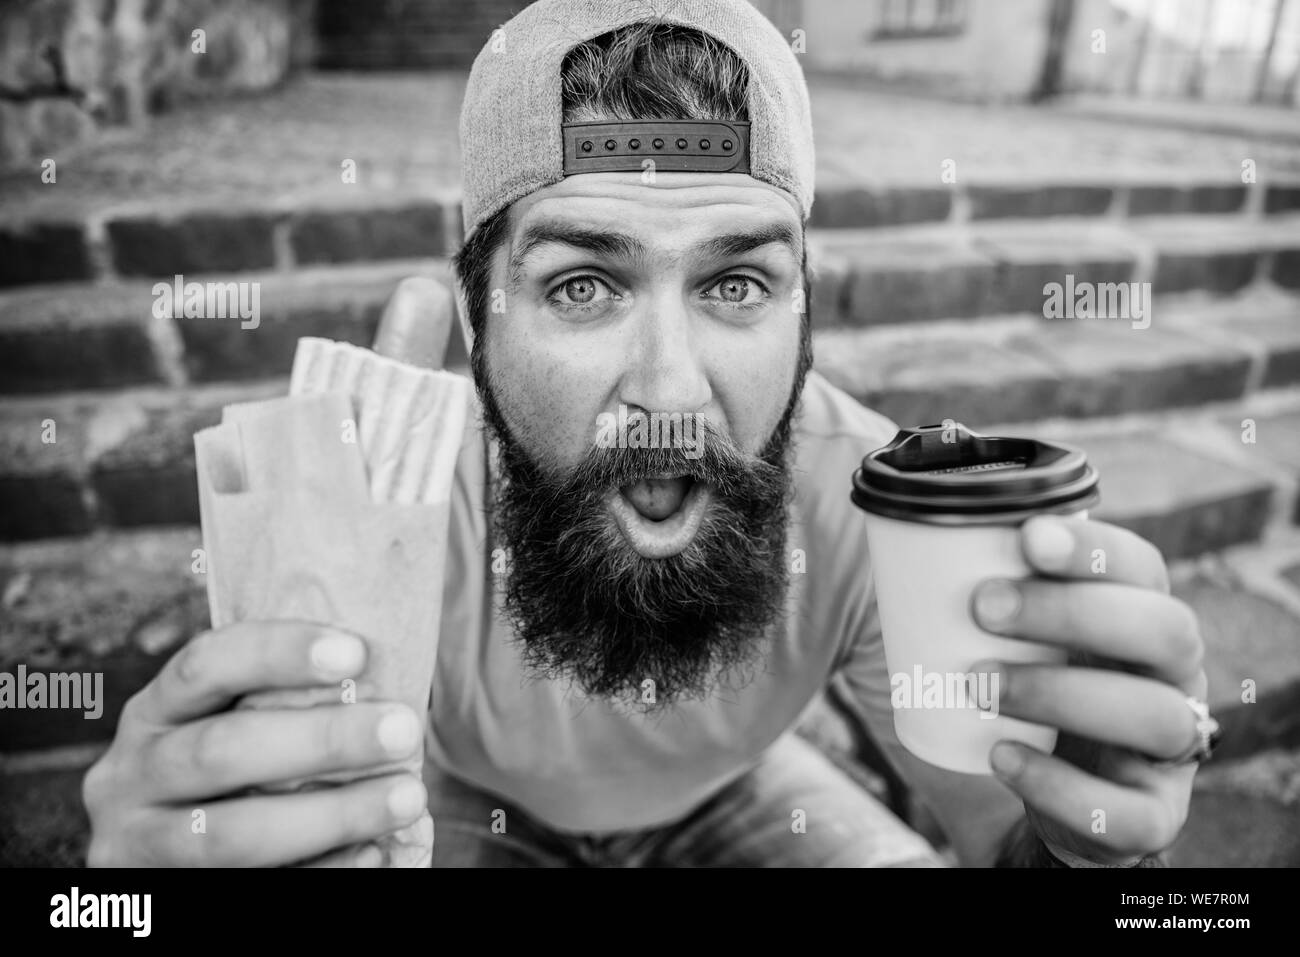 Urban lifestyle nutrition. Junk food. Carefree hipster eat junk food while sit stairs. Snack for good mood. Guy eating hot dog. Street food concept. Man bearded eat tasty sausage and drink paper cup. Stock Photo